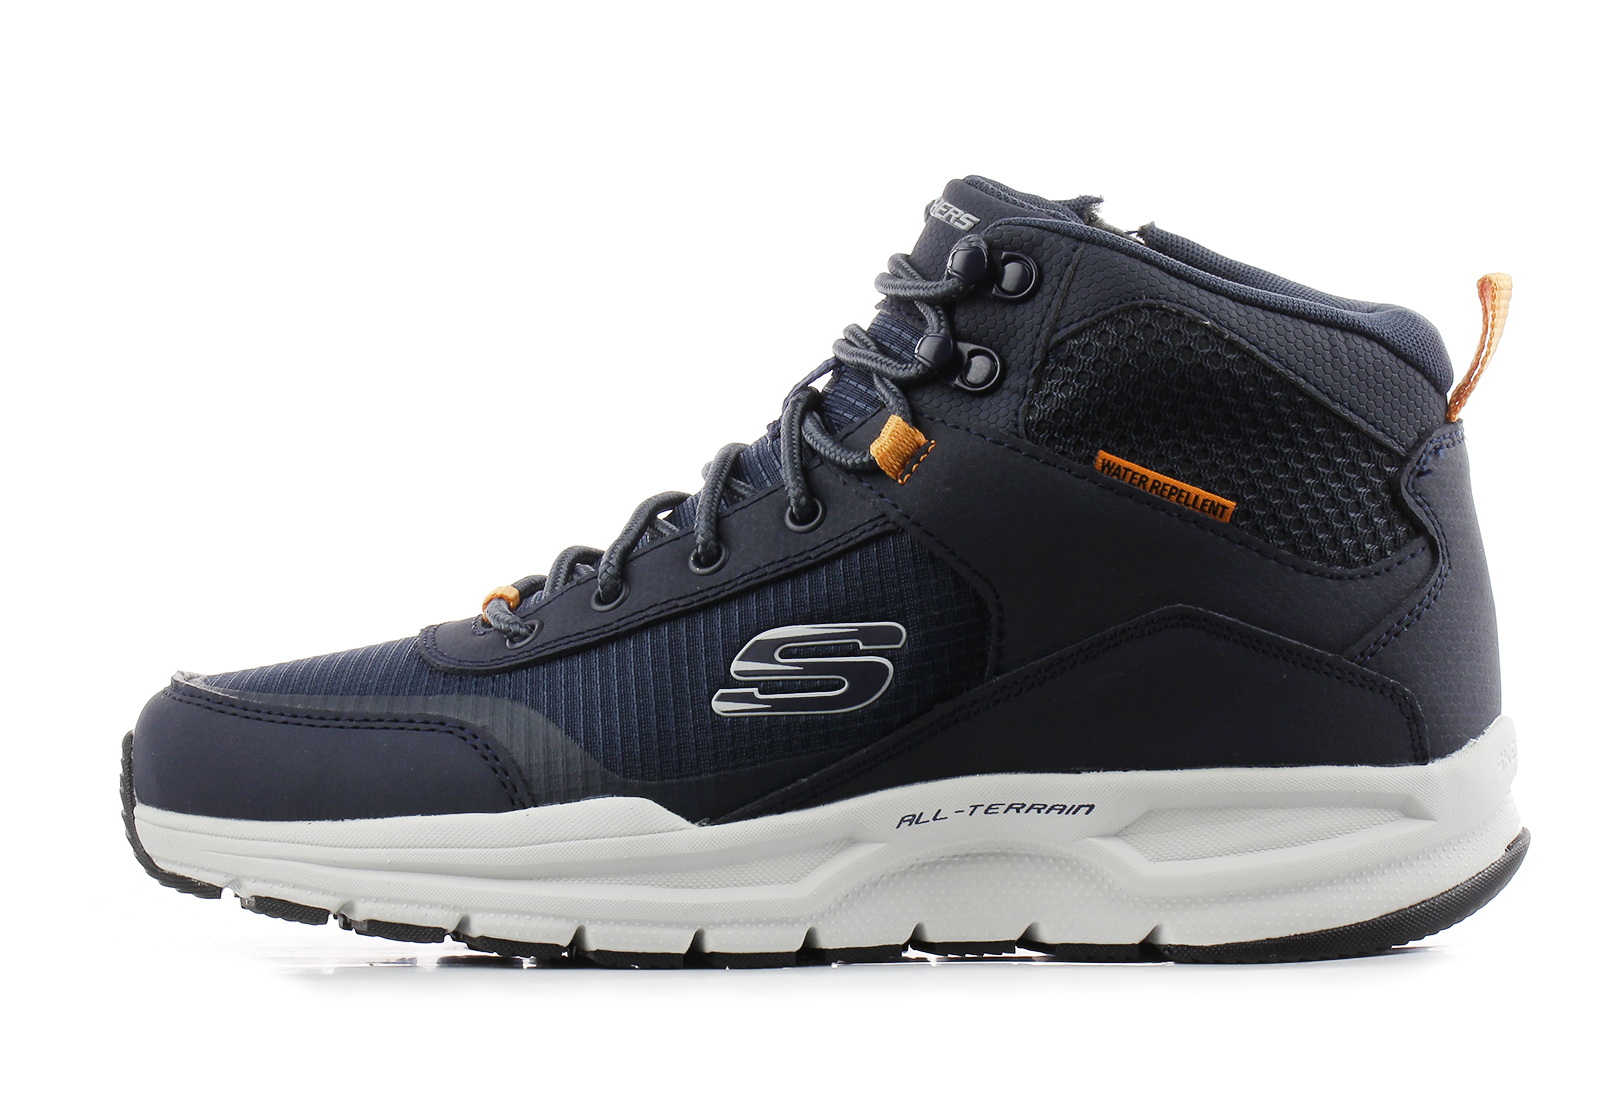 Skechers High sneakers - Escape Plan 2.0-woodrock - 51705-NVY - Online shop  for sneakers, shoes and boots